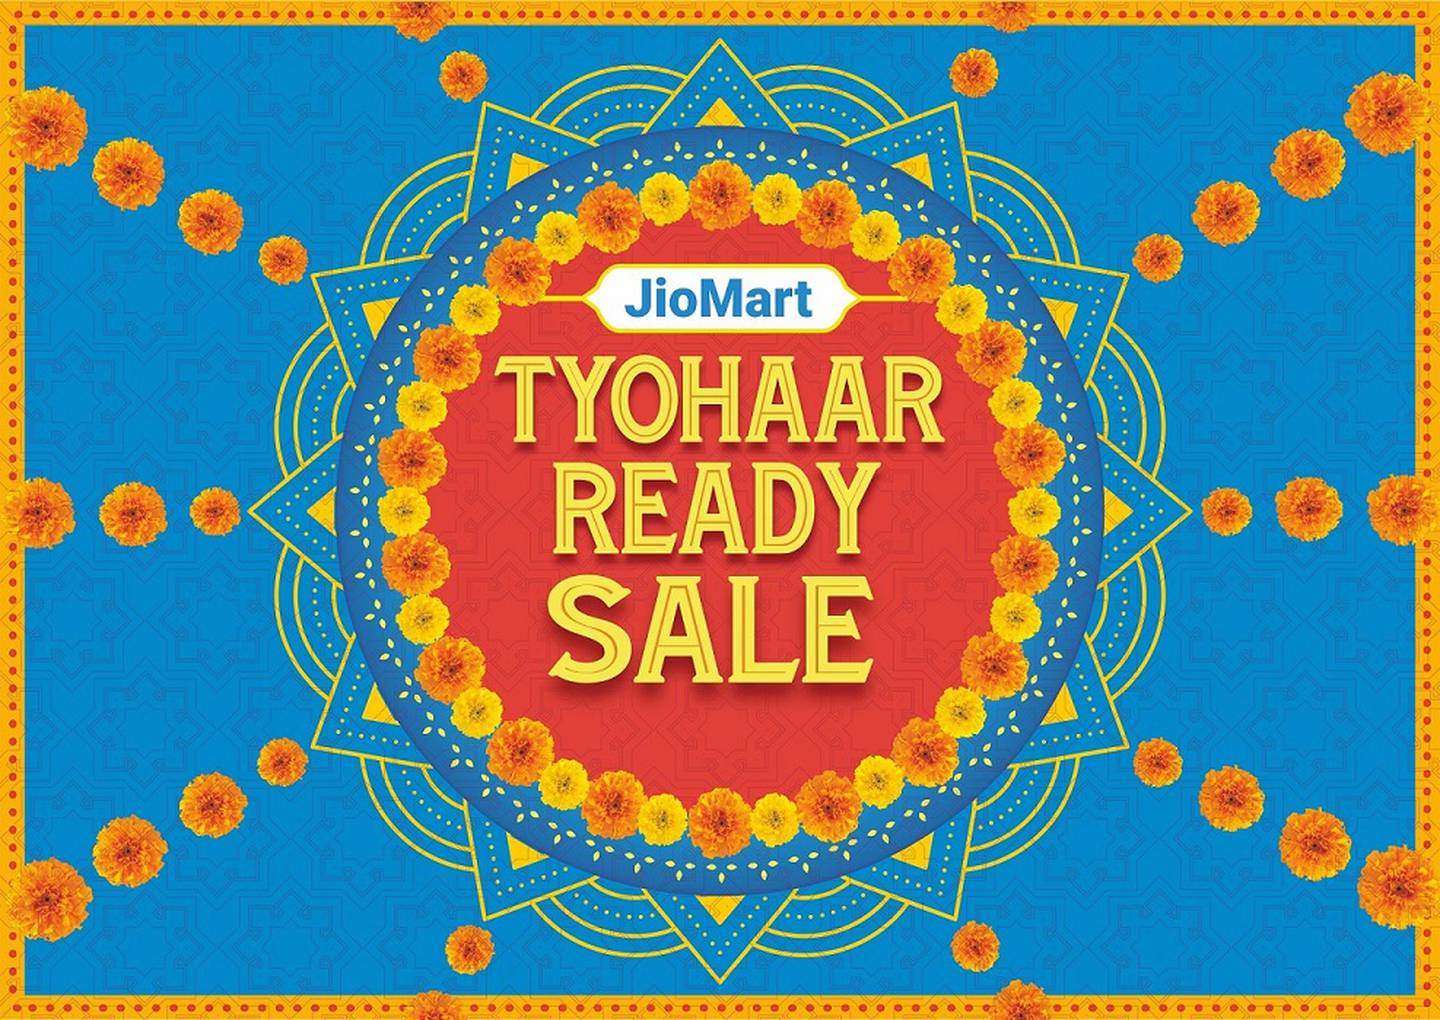 Reliance Industries-owned JioMart created campaigns for the e-tailer's two sales during the 2022 Diwali festive season.